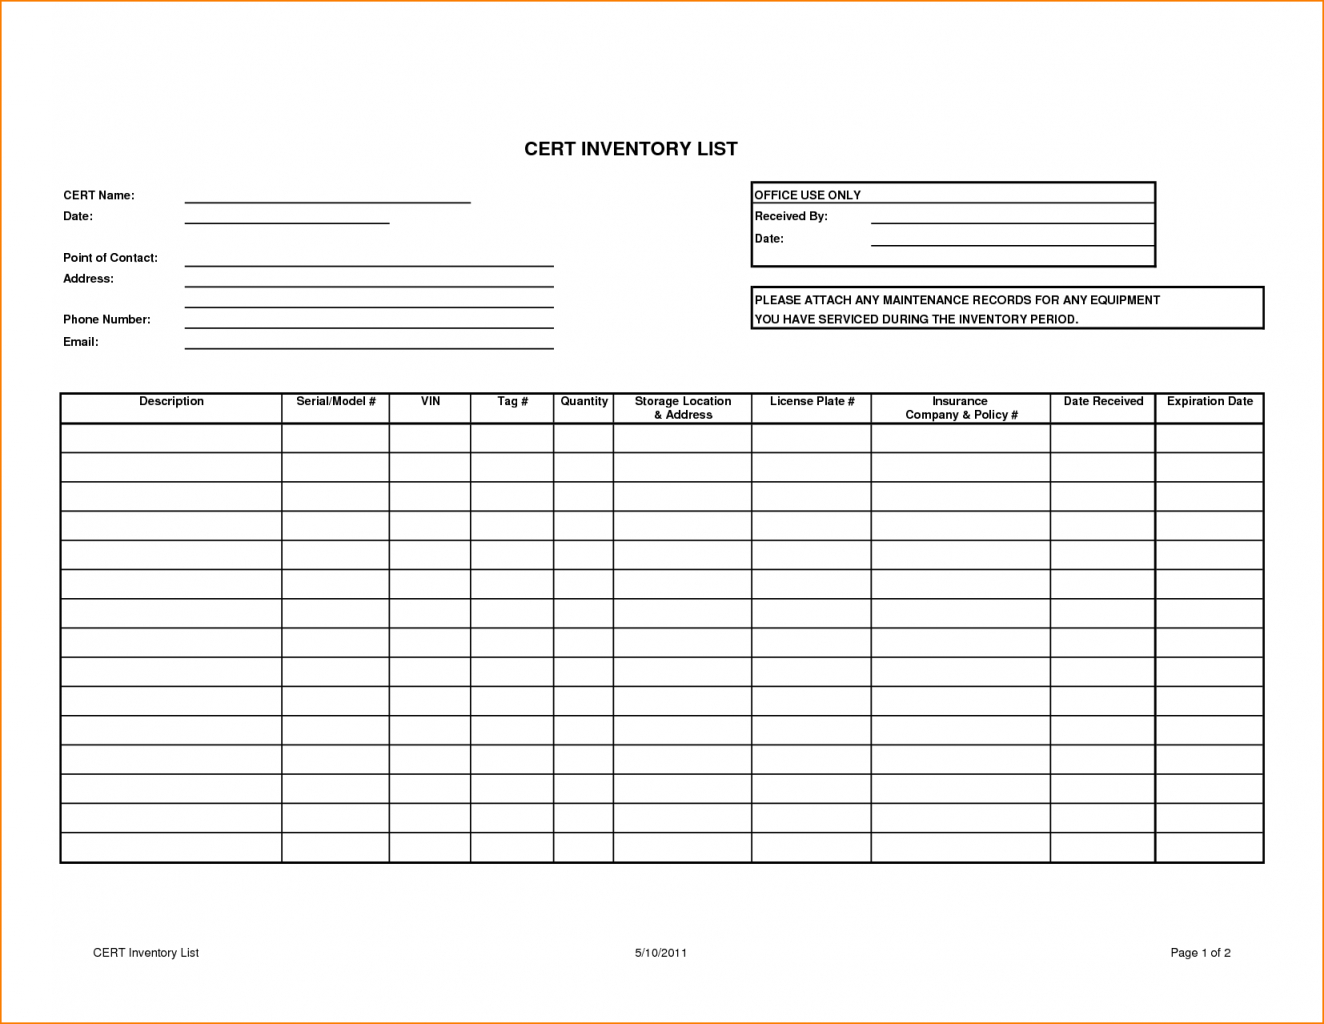 Excel Inventory Tracking Spreadsheet Template regarding Stock Management Software In Excel Free Download Inventory Tracking